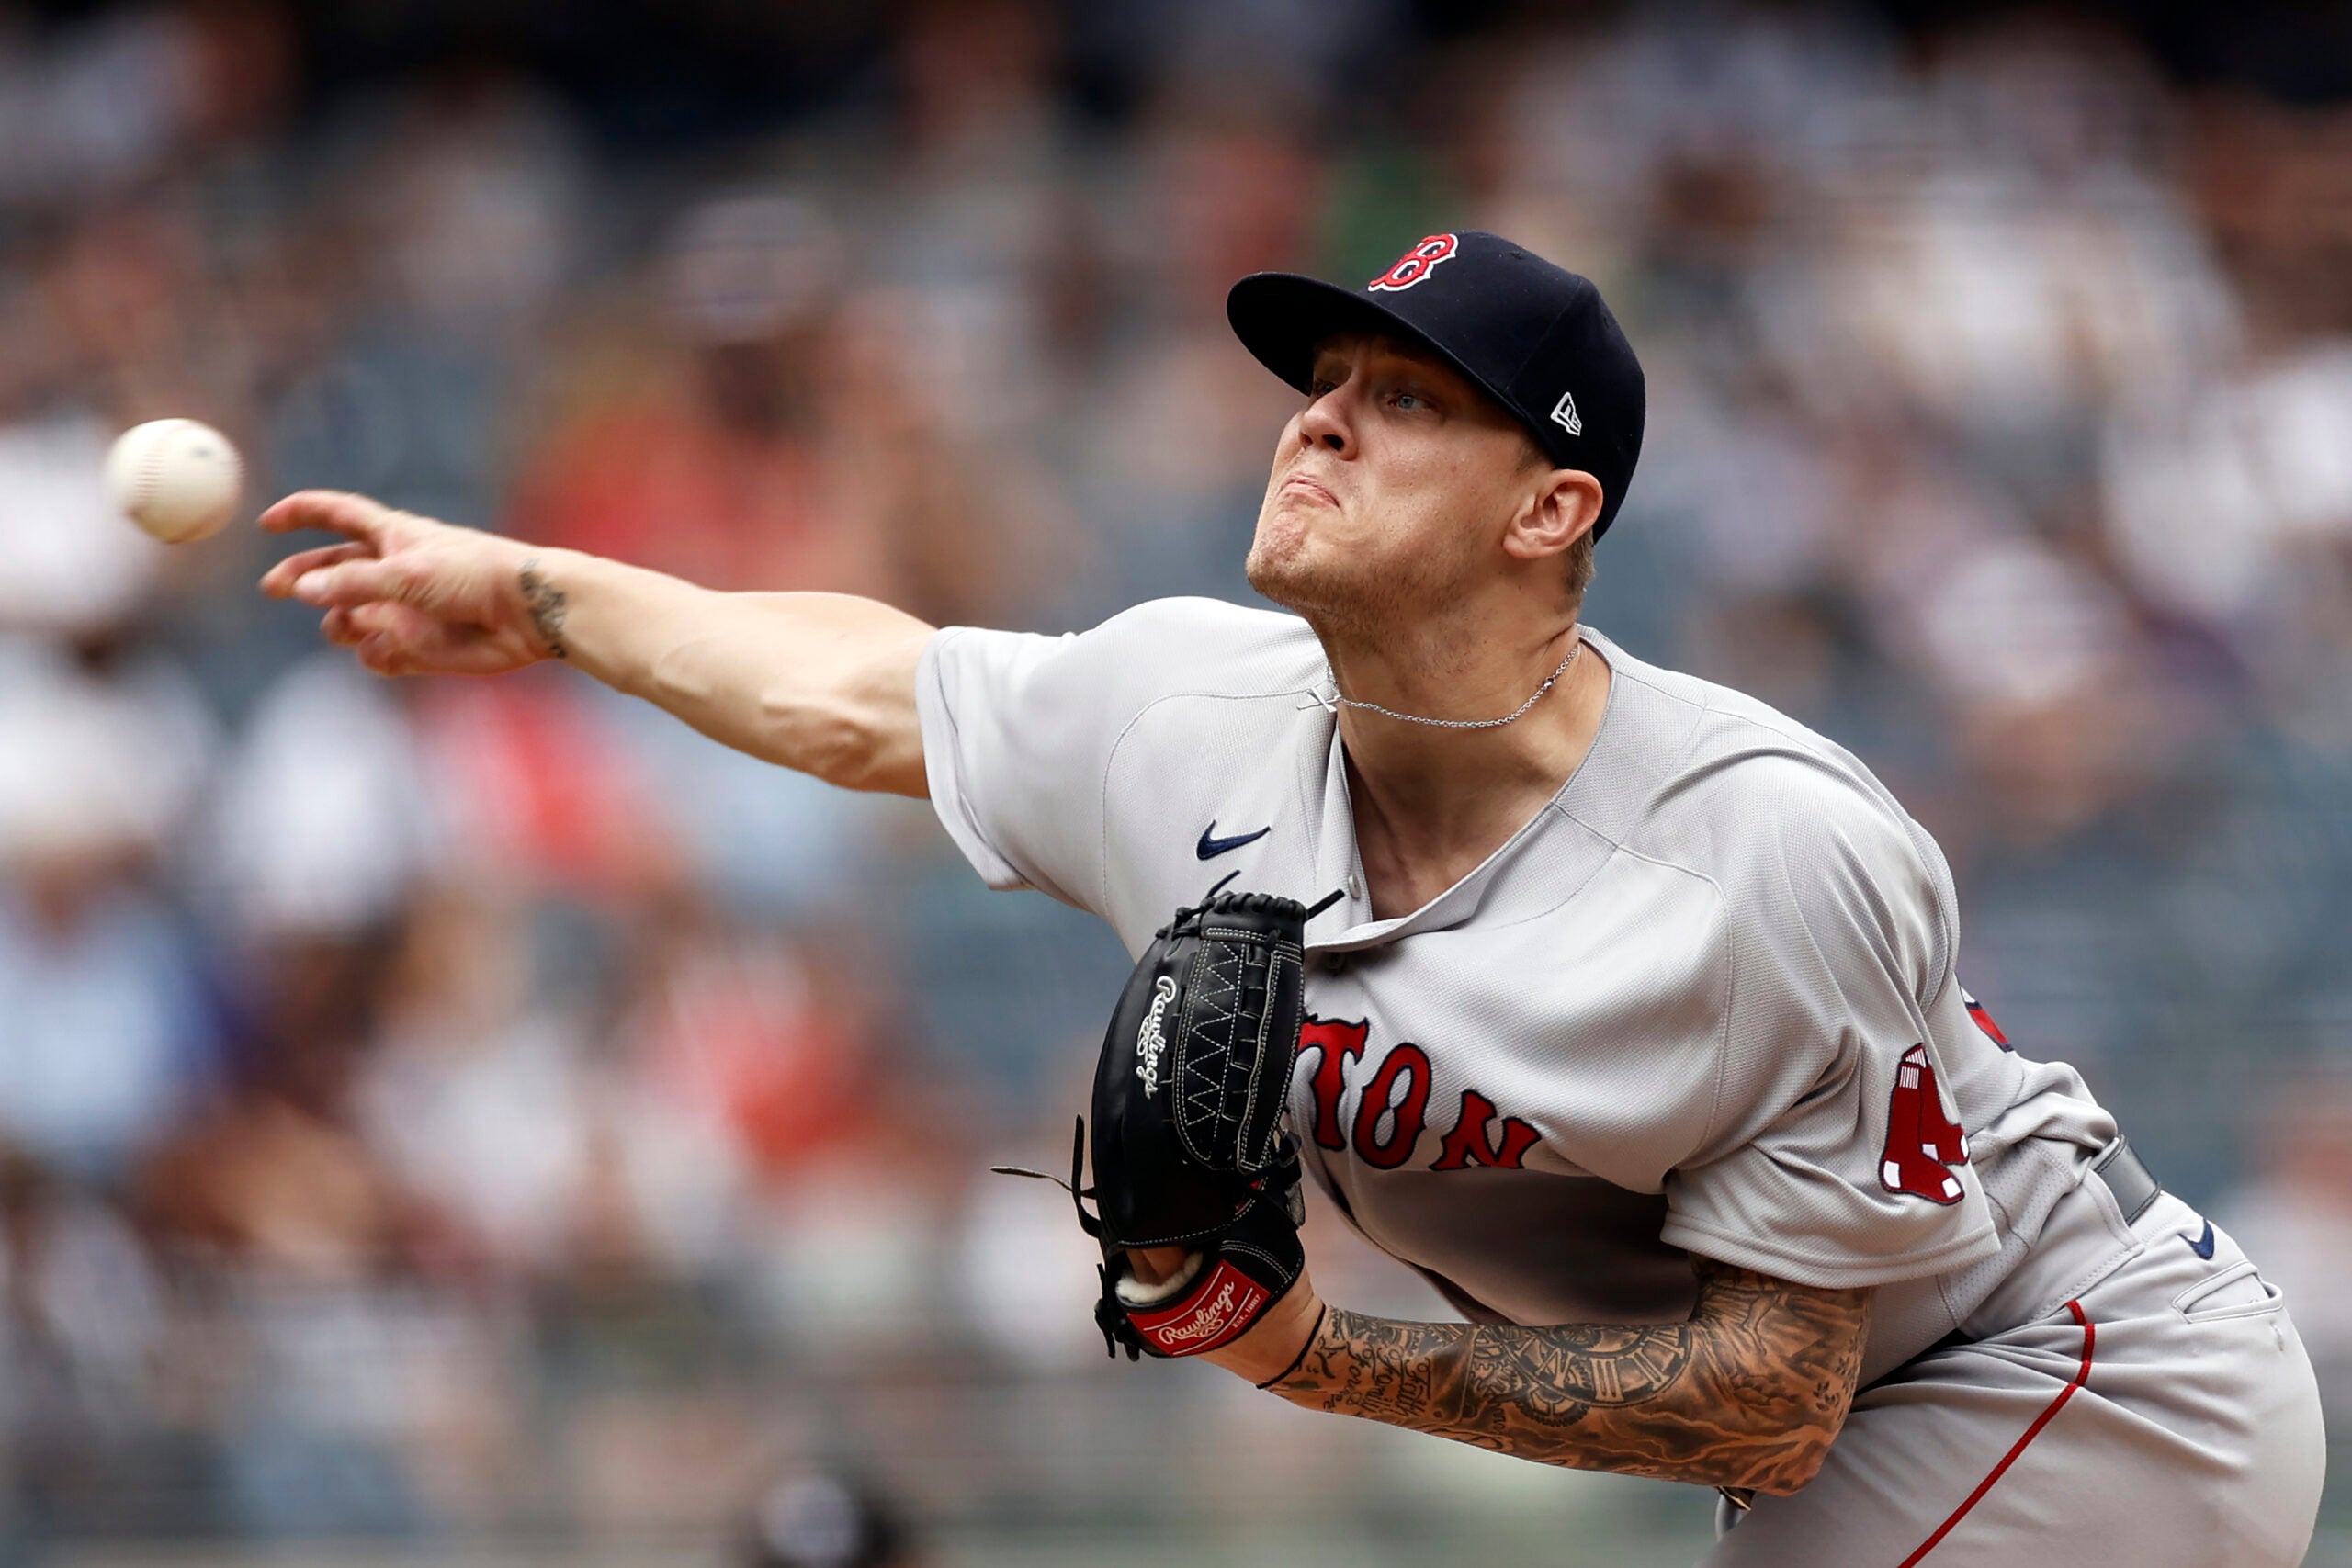 Mastrodonato: Tanner Houck proves he deserves to stay in Red Sox rotation